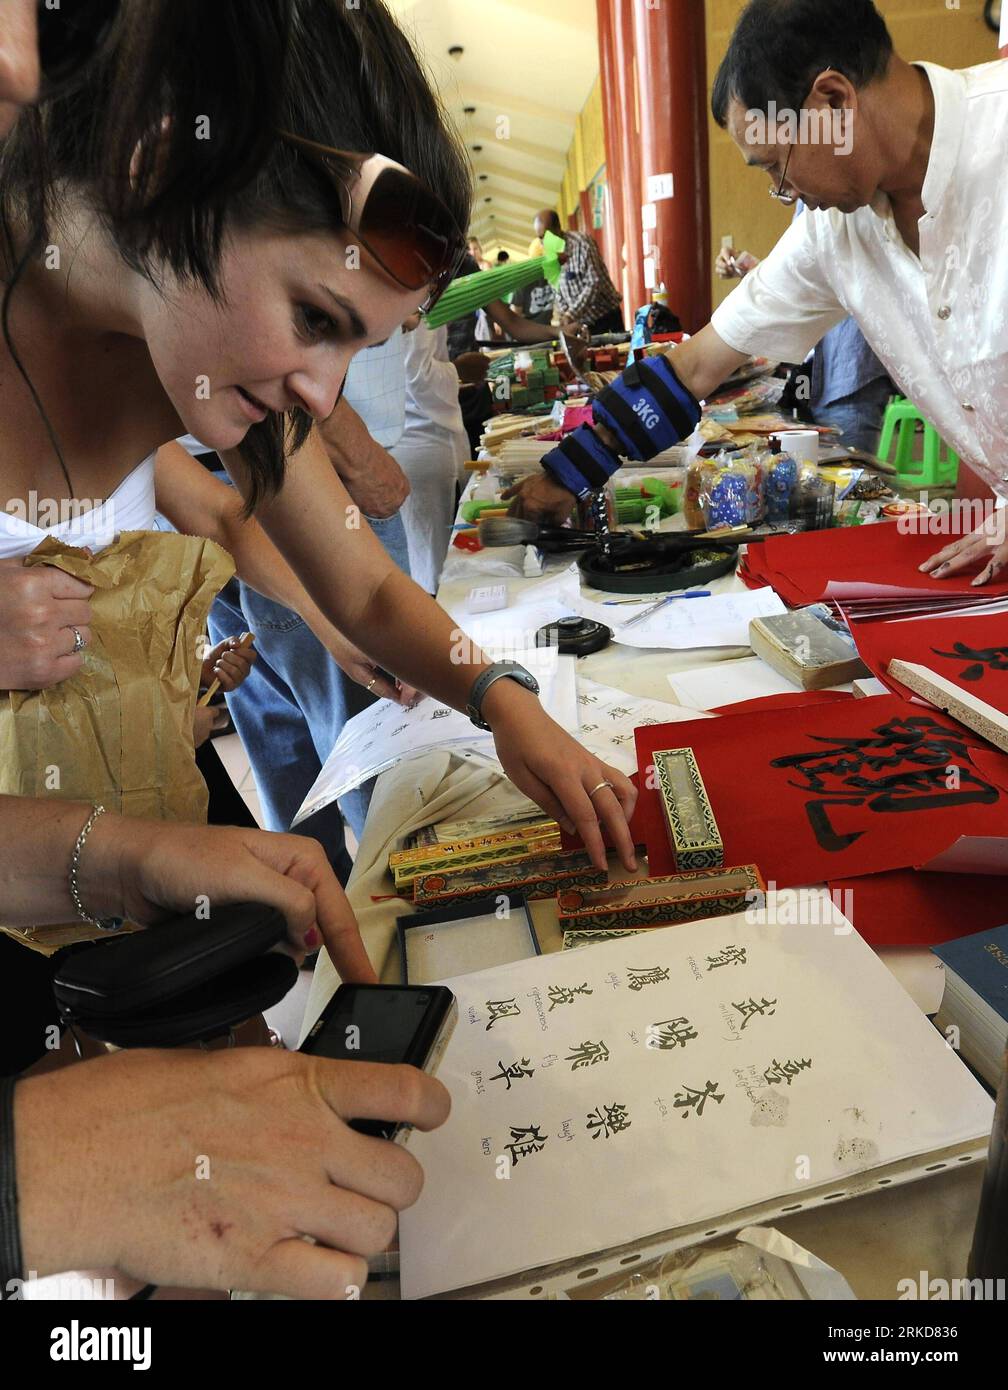 Bildnummer: 54884178  Datum: 06.02.2011  Copyright: imago/Xinhua (110206) -- PRETORIA, Feb. 6, 2011 (Xinhua) -- A South African woman watches Chinese letters at the Chinese New Year Culture Festival held by the Nan Hua Temple in Bronkhorstspruit, South Africa, Feb. 6, 2011. The Chinese New Year Culture Festival held on Sunday has attracted more than 15,000 overseas Chinese and local civilians to enjoy the Chinese culture including watching lion and dragon dances, receiving bonus, tasting Chinese tea and food. (Xinhua/Li Qihua) SOUTH AFRICA-CHINESE NEW YEAR CULTURE FESTIVAL PUBLICATIONxNOTxINxC Stock Photo